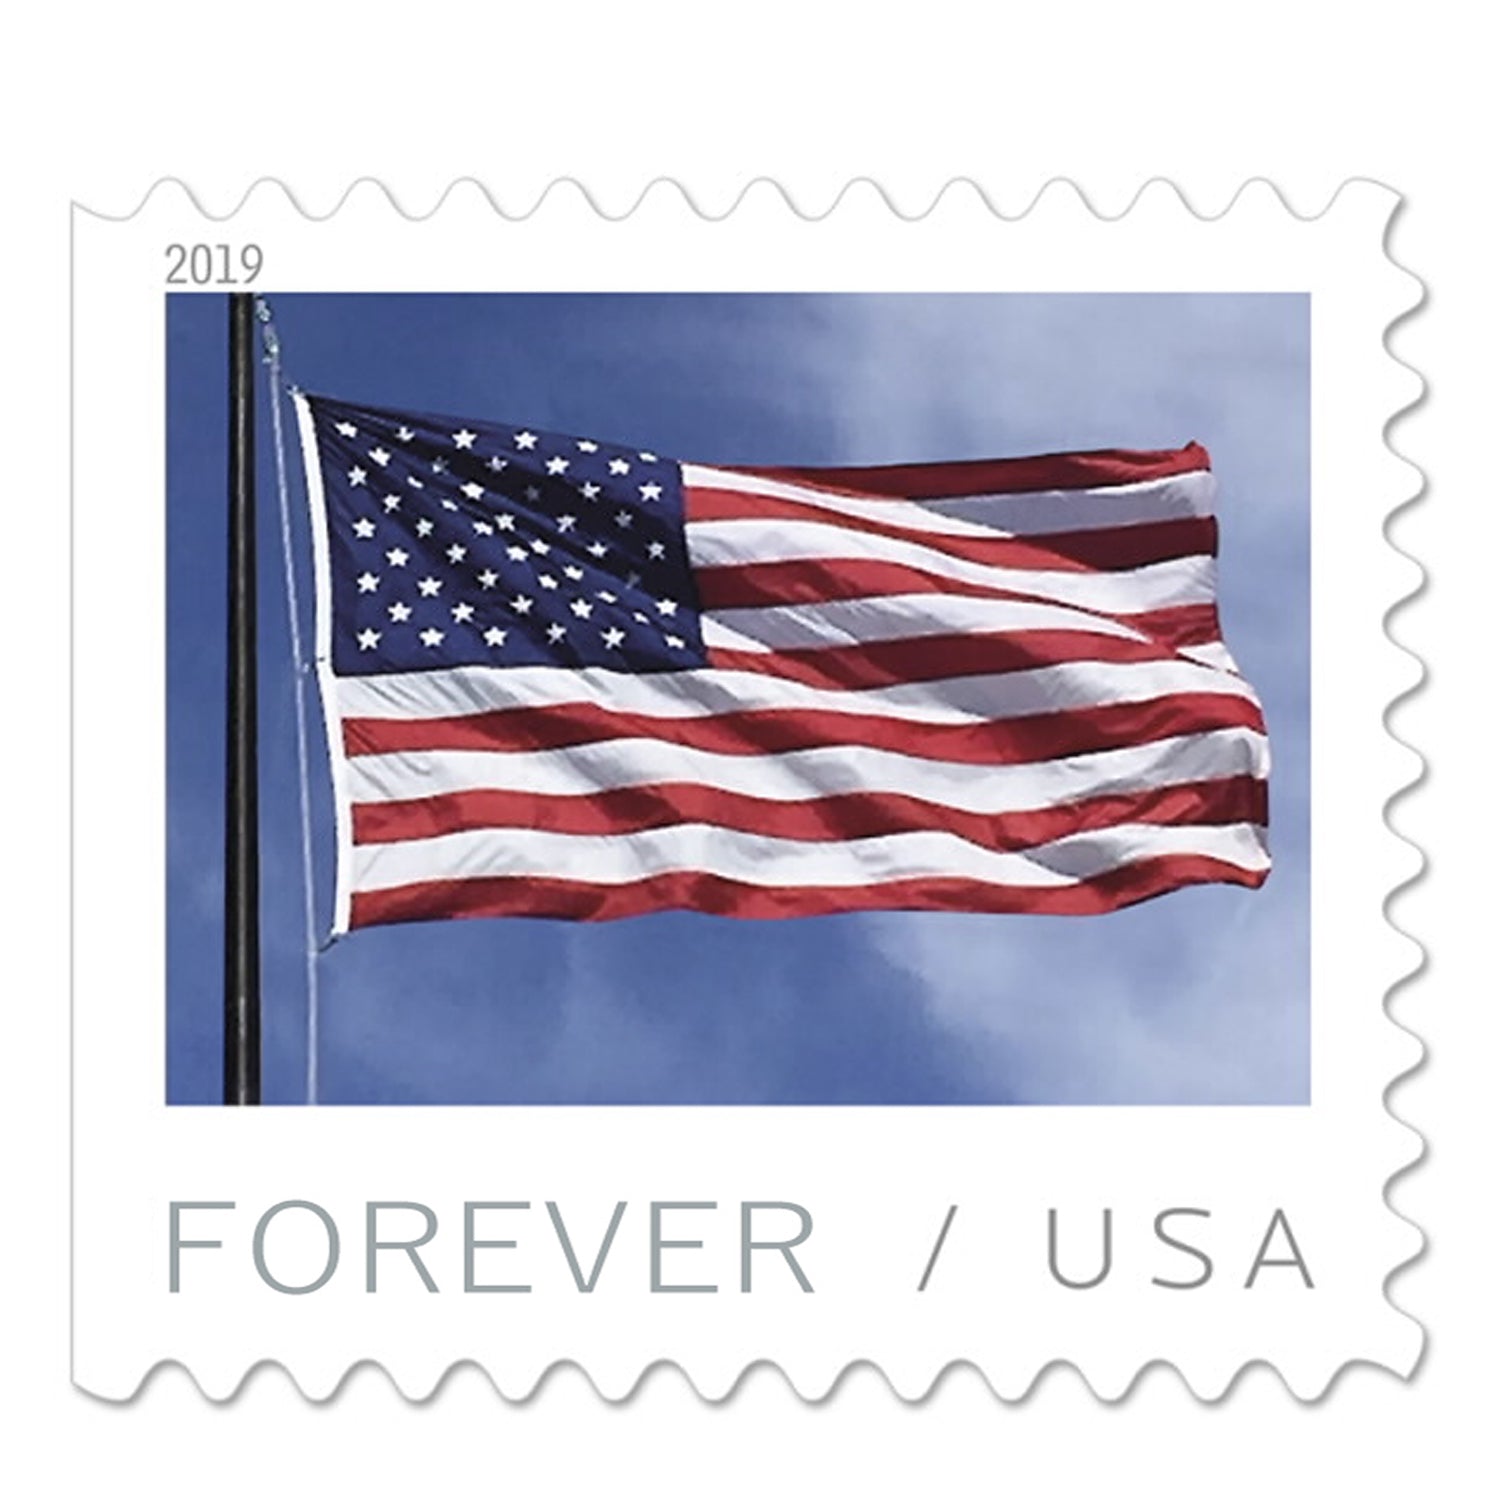 2019 US Flags Forever Postage Stamps available in Rolls / Booklets - Mailboxes of Flushing